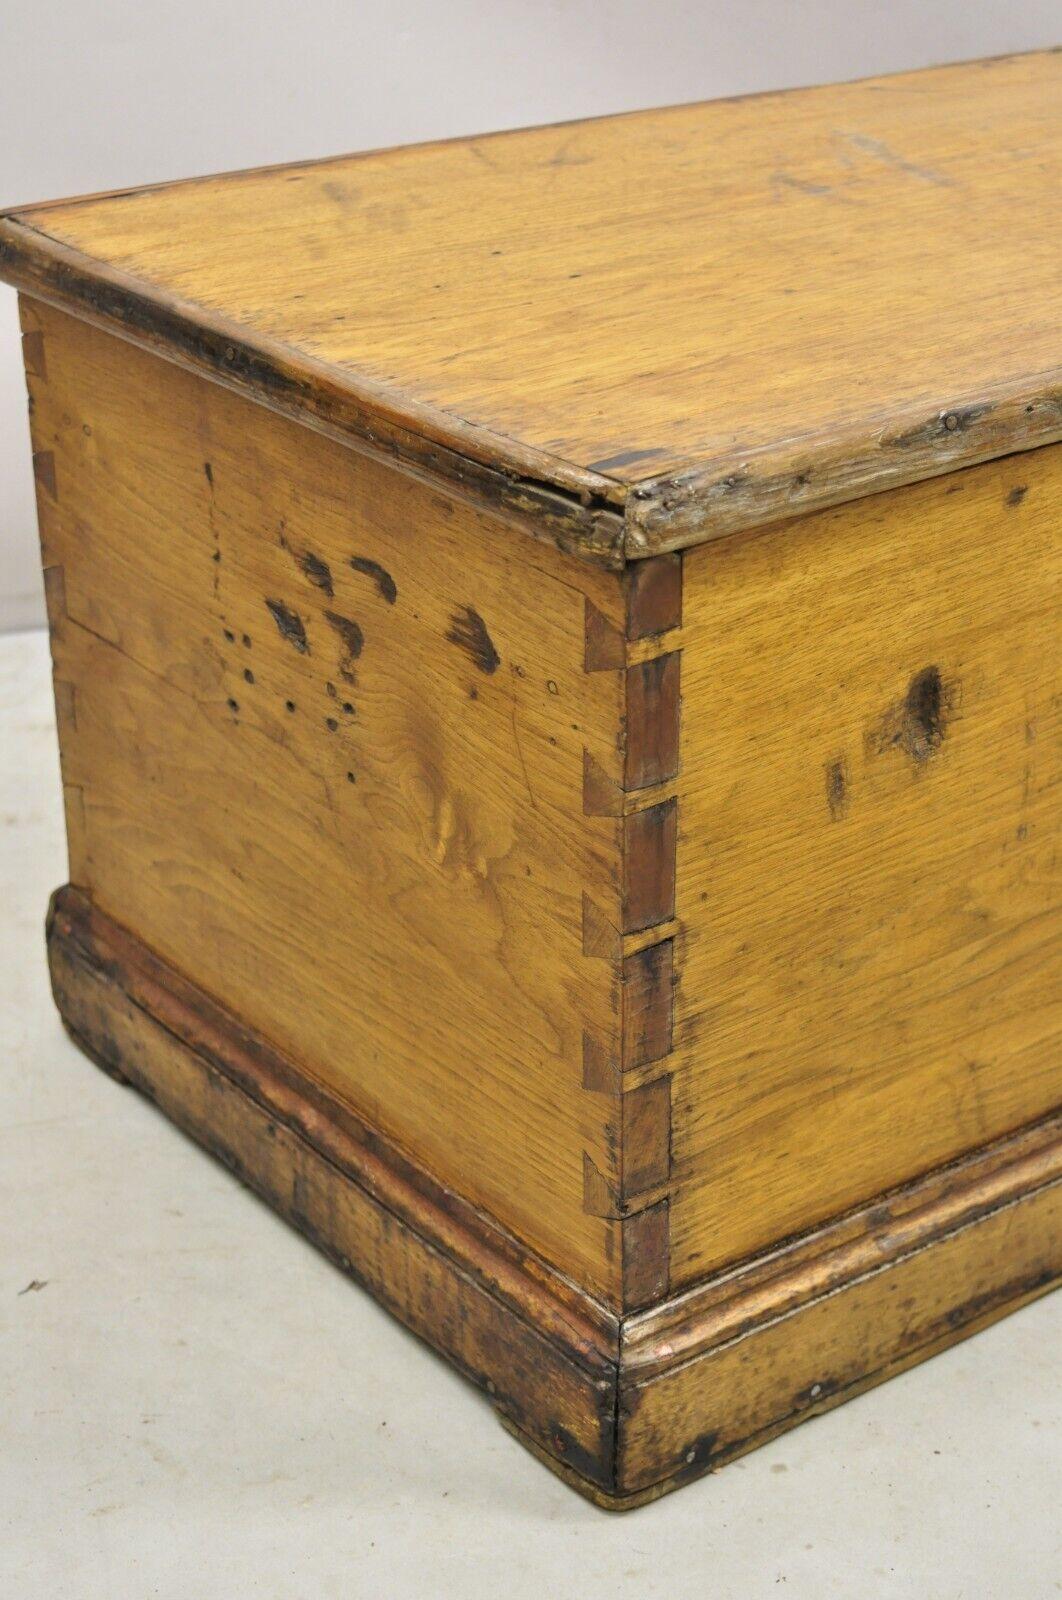 19th Century 19th C Antique Primitive Country French Wooden Dovetail Blanket Chest Trunk